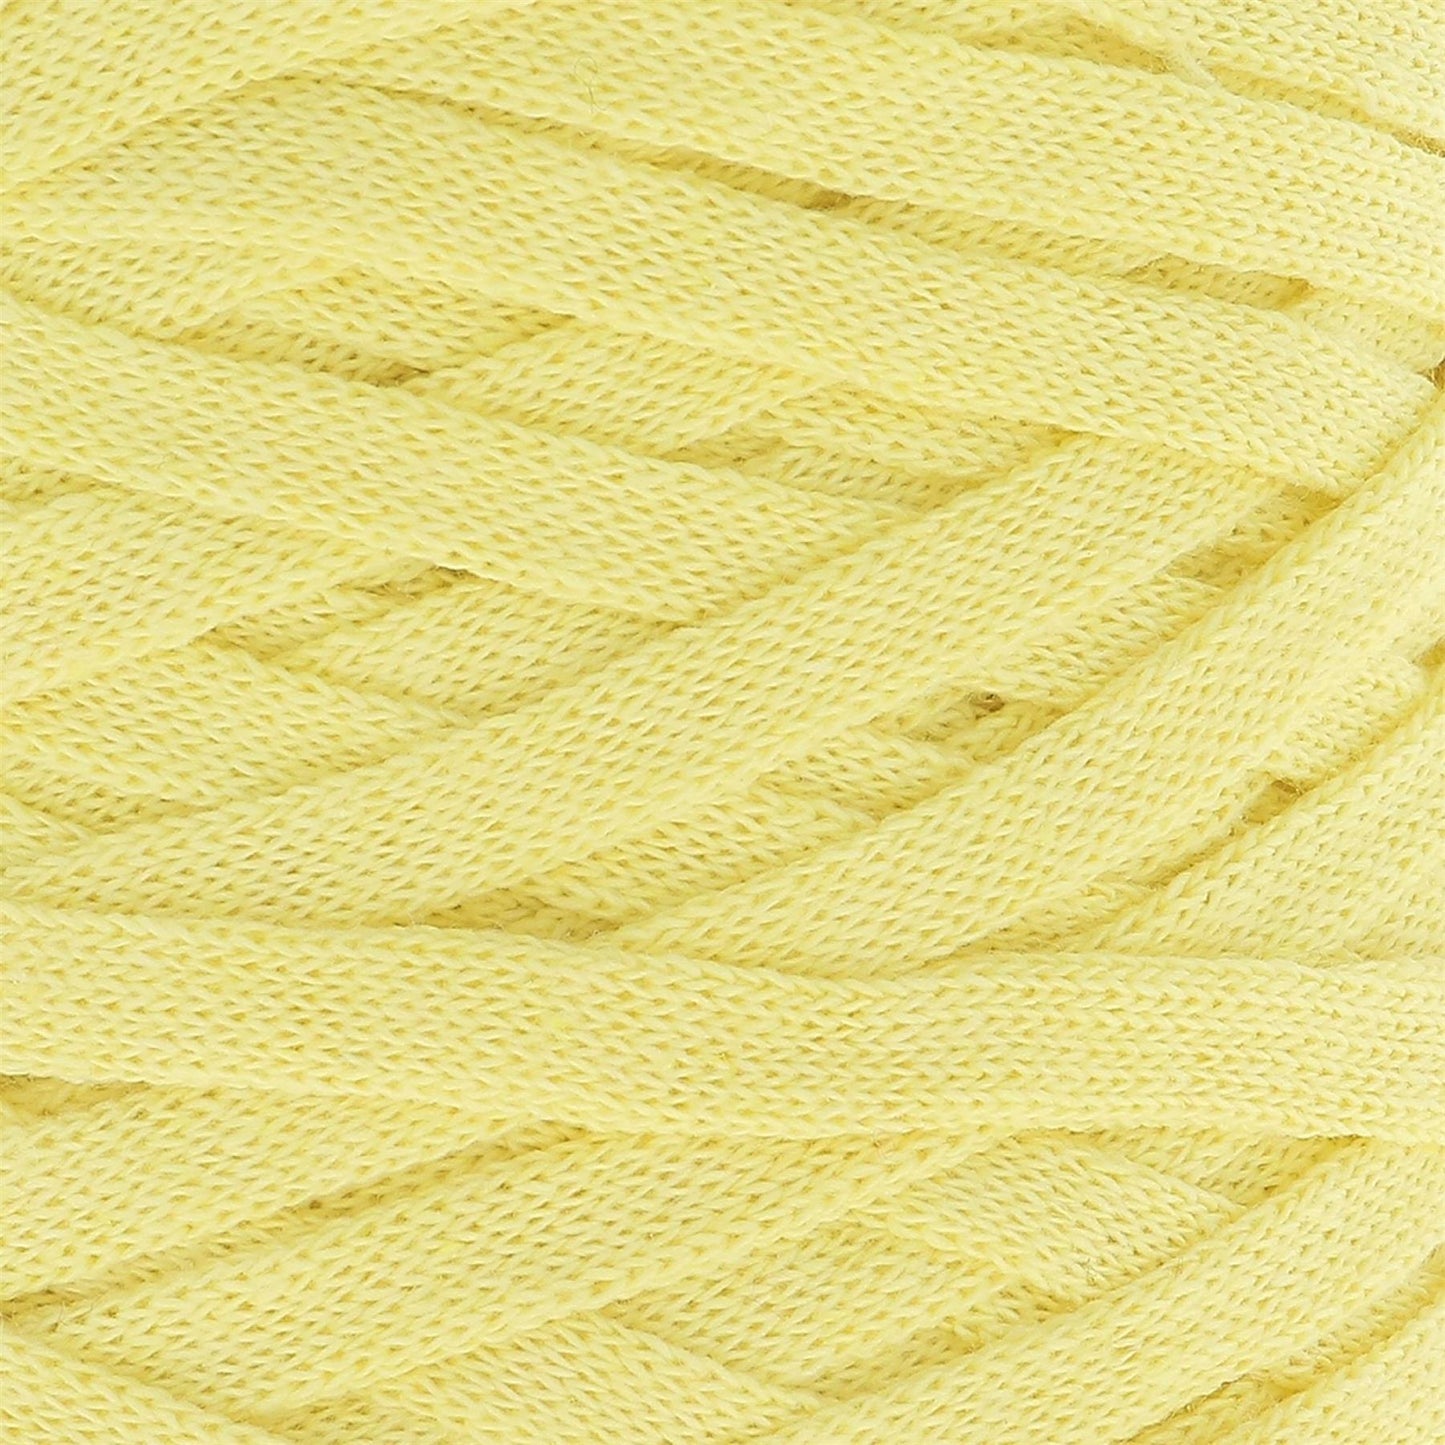 Hoooked RXL45 RibbonXL Frosted Yellow Cotton T-Shirt Yarn - 120M 250g